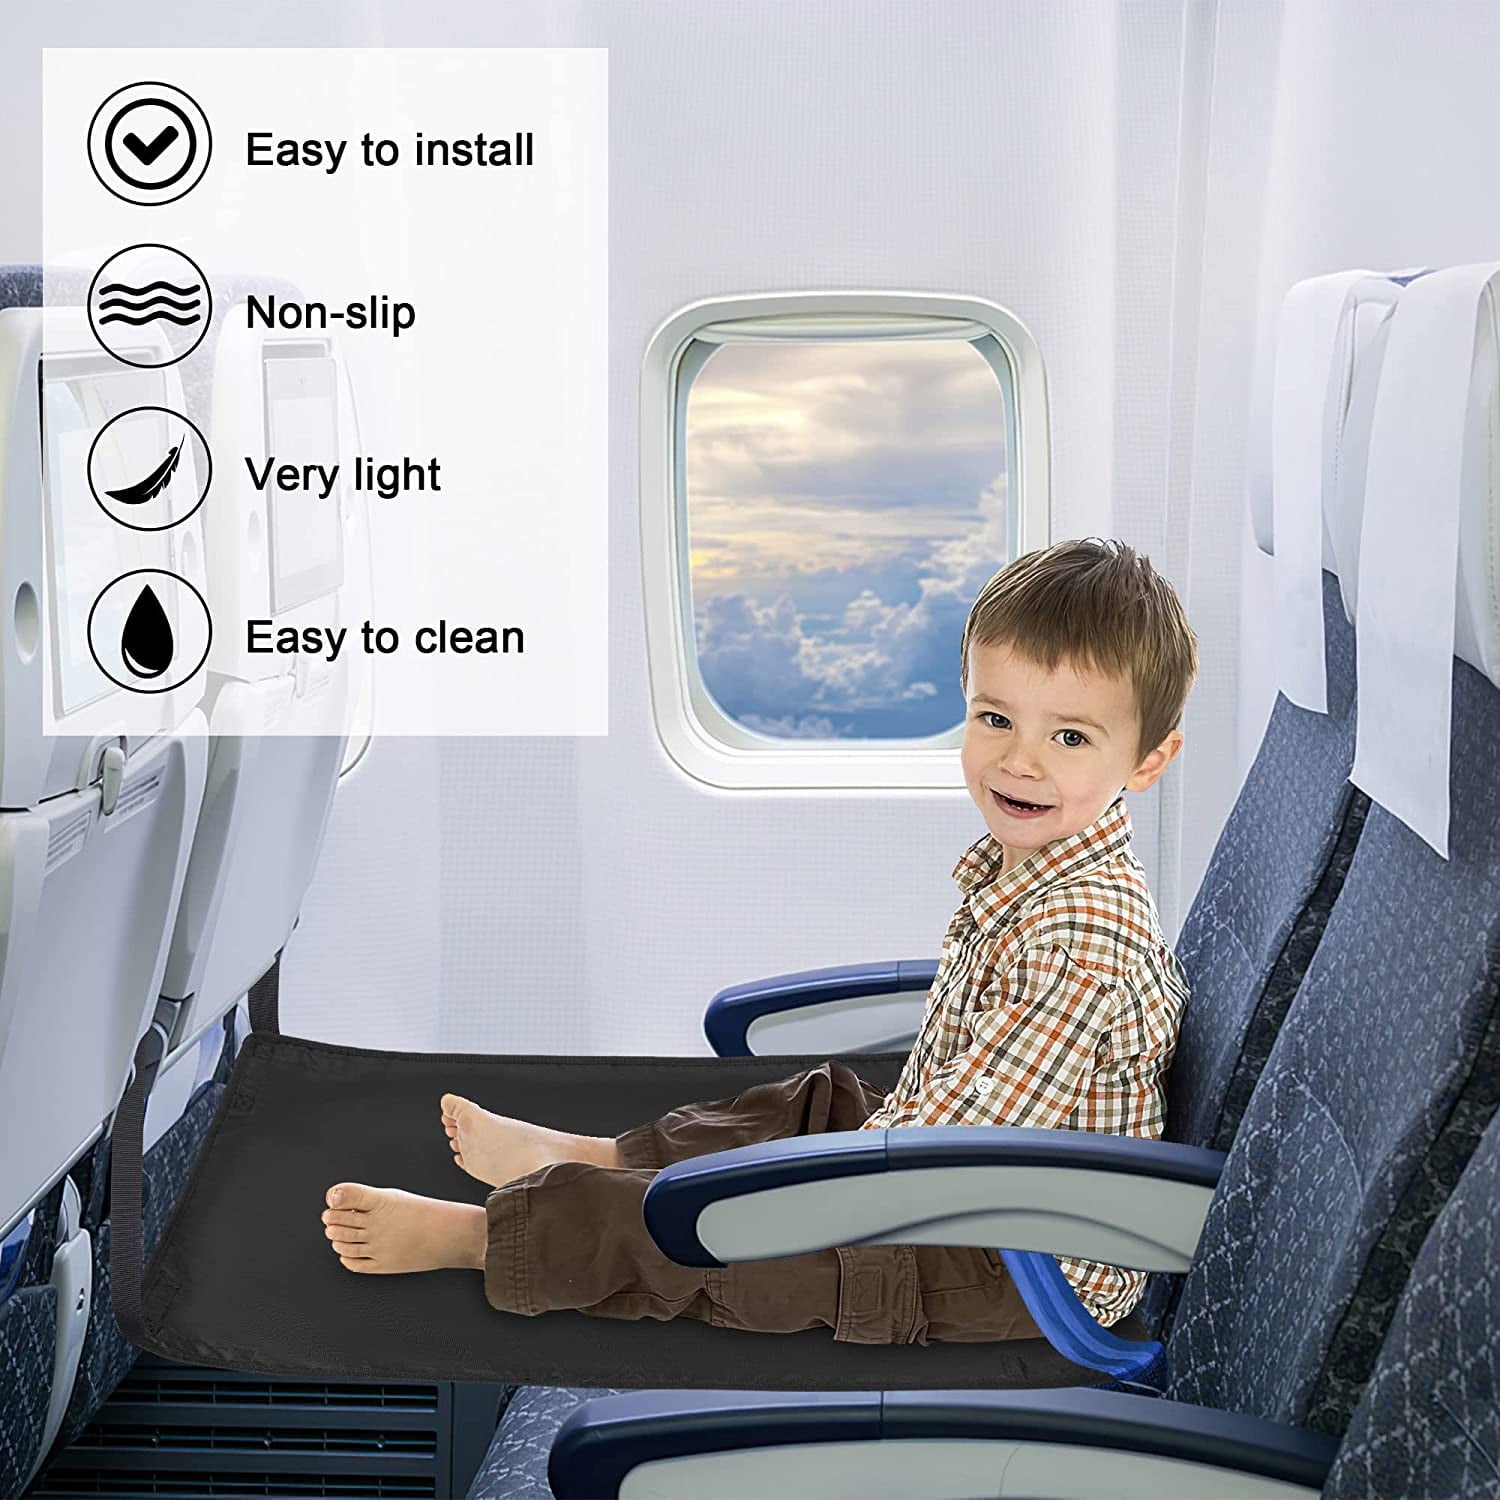  Airplane Footrest for Kids,Travel Airplane Toddler Bed,Portable  Toddler Bed for Travel,Travel Foot Rest for Airplane Flights,Travel Seat  Cushion for Airplane,Airplane Seat Extender for Kids (Black) : Baby